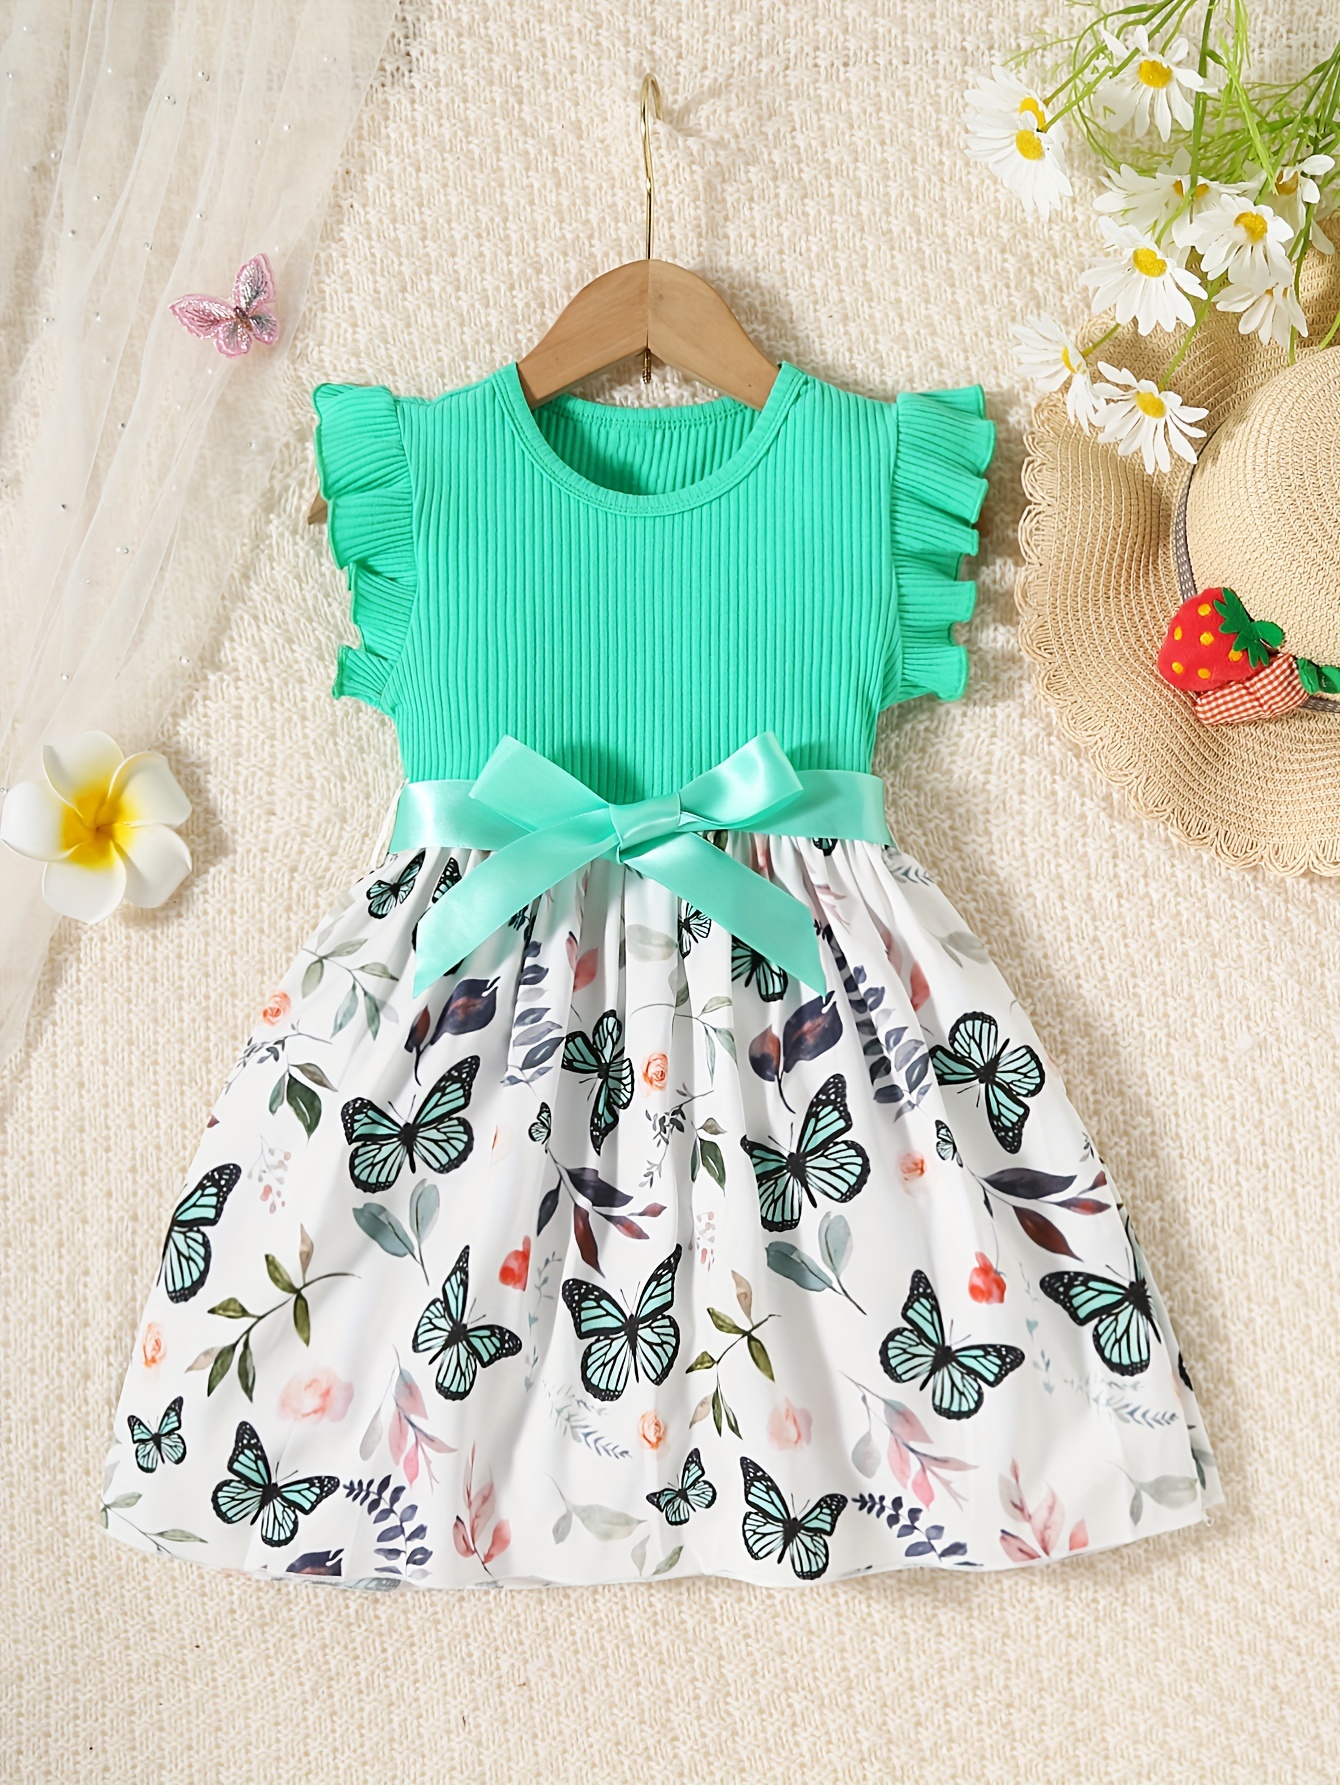 Splicing Ribbed Flutter Trim Butterfly Print Dress With Strap For Girls Summer Party Gift